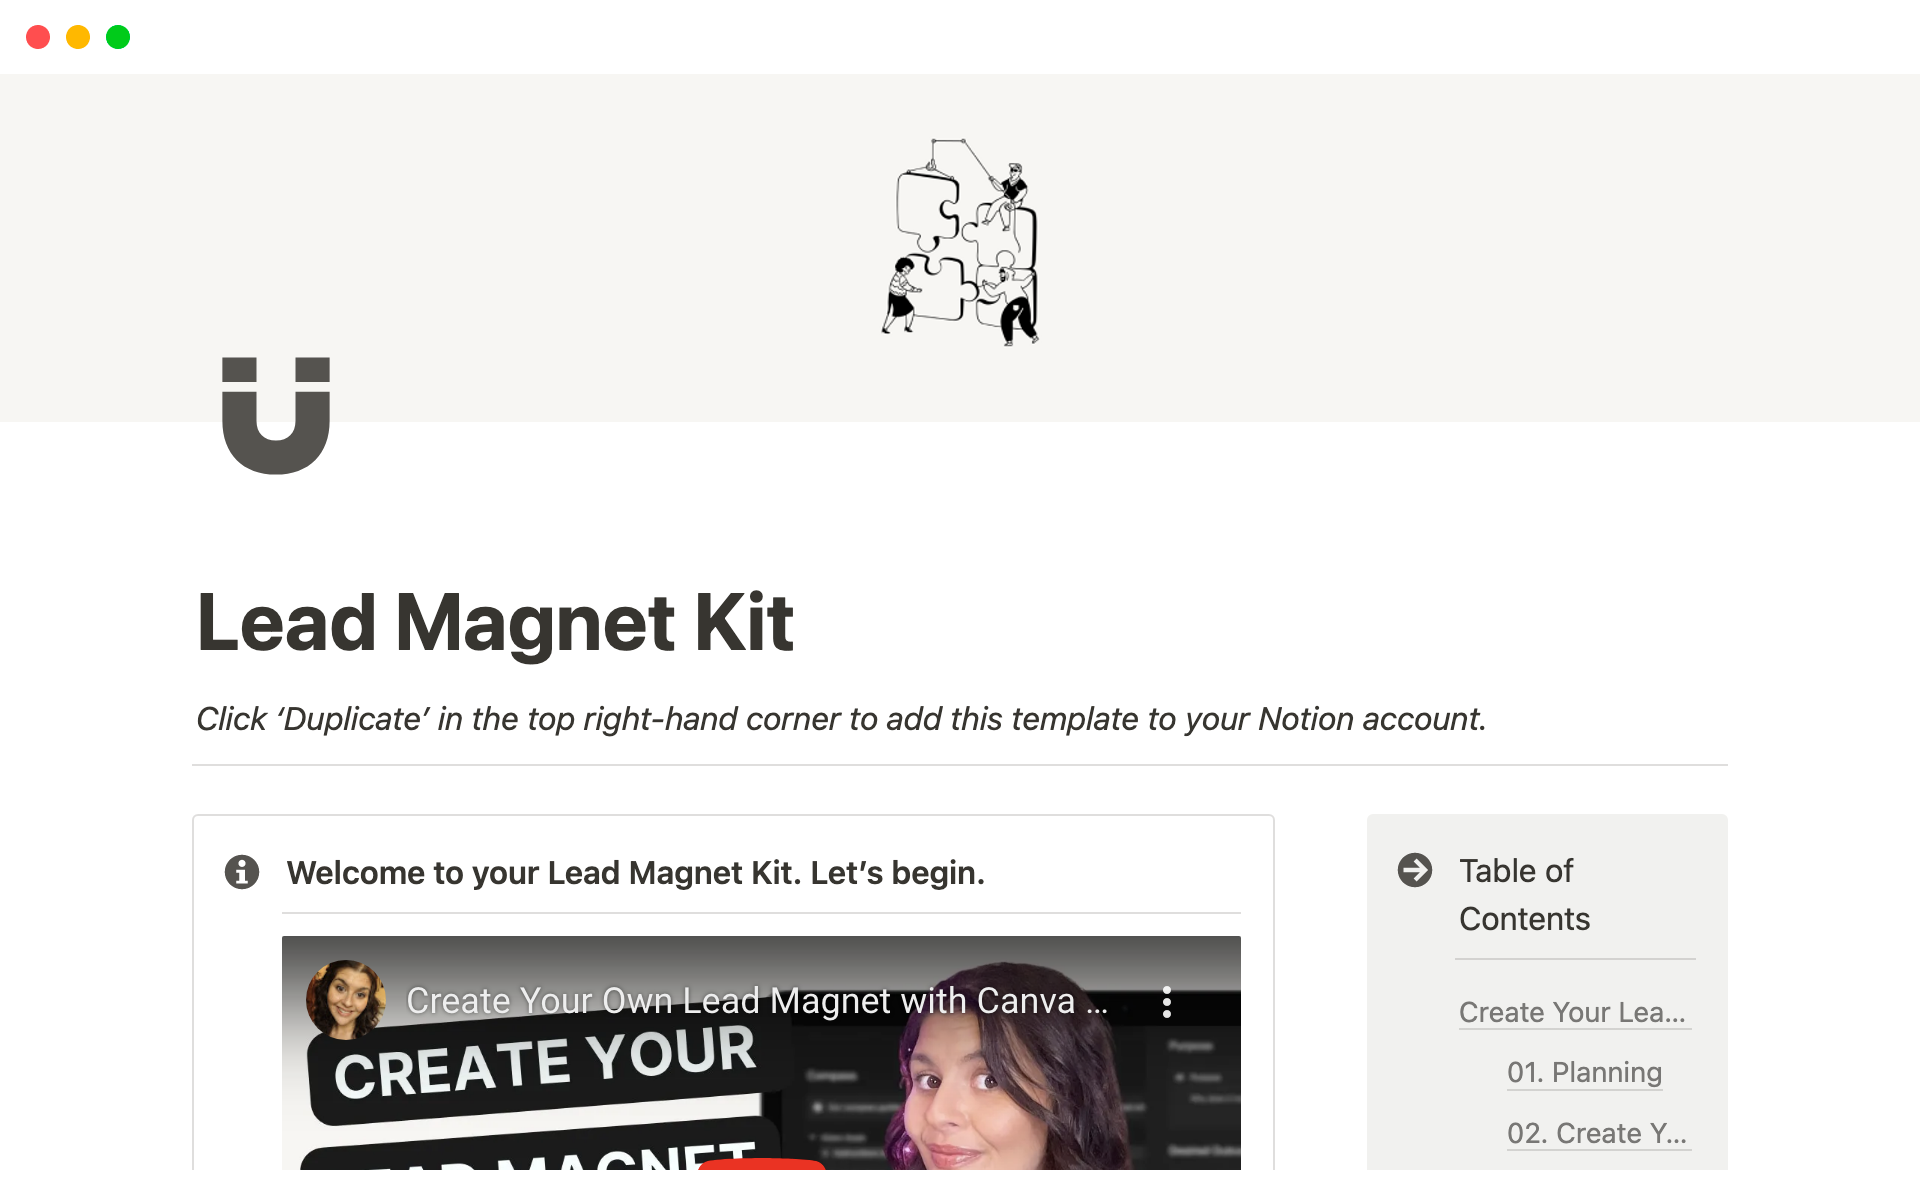 Plan, design and create your own freebie/lead magnet and start collecting email subscribers today!